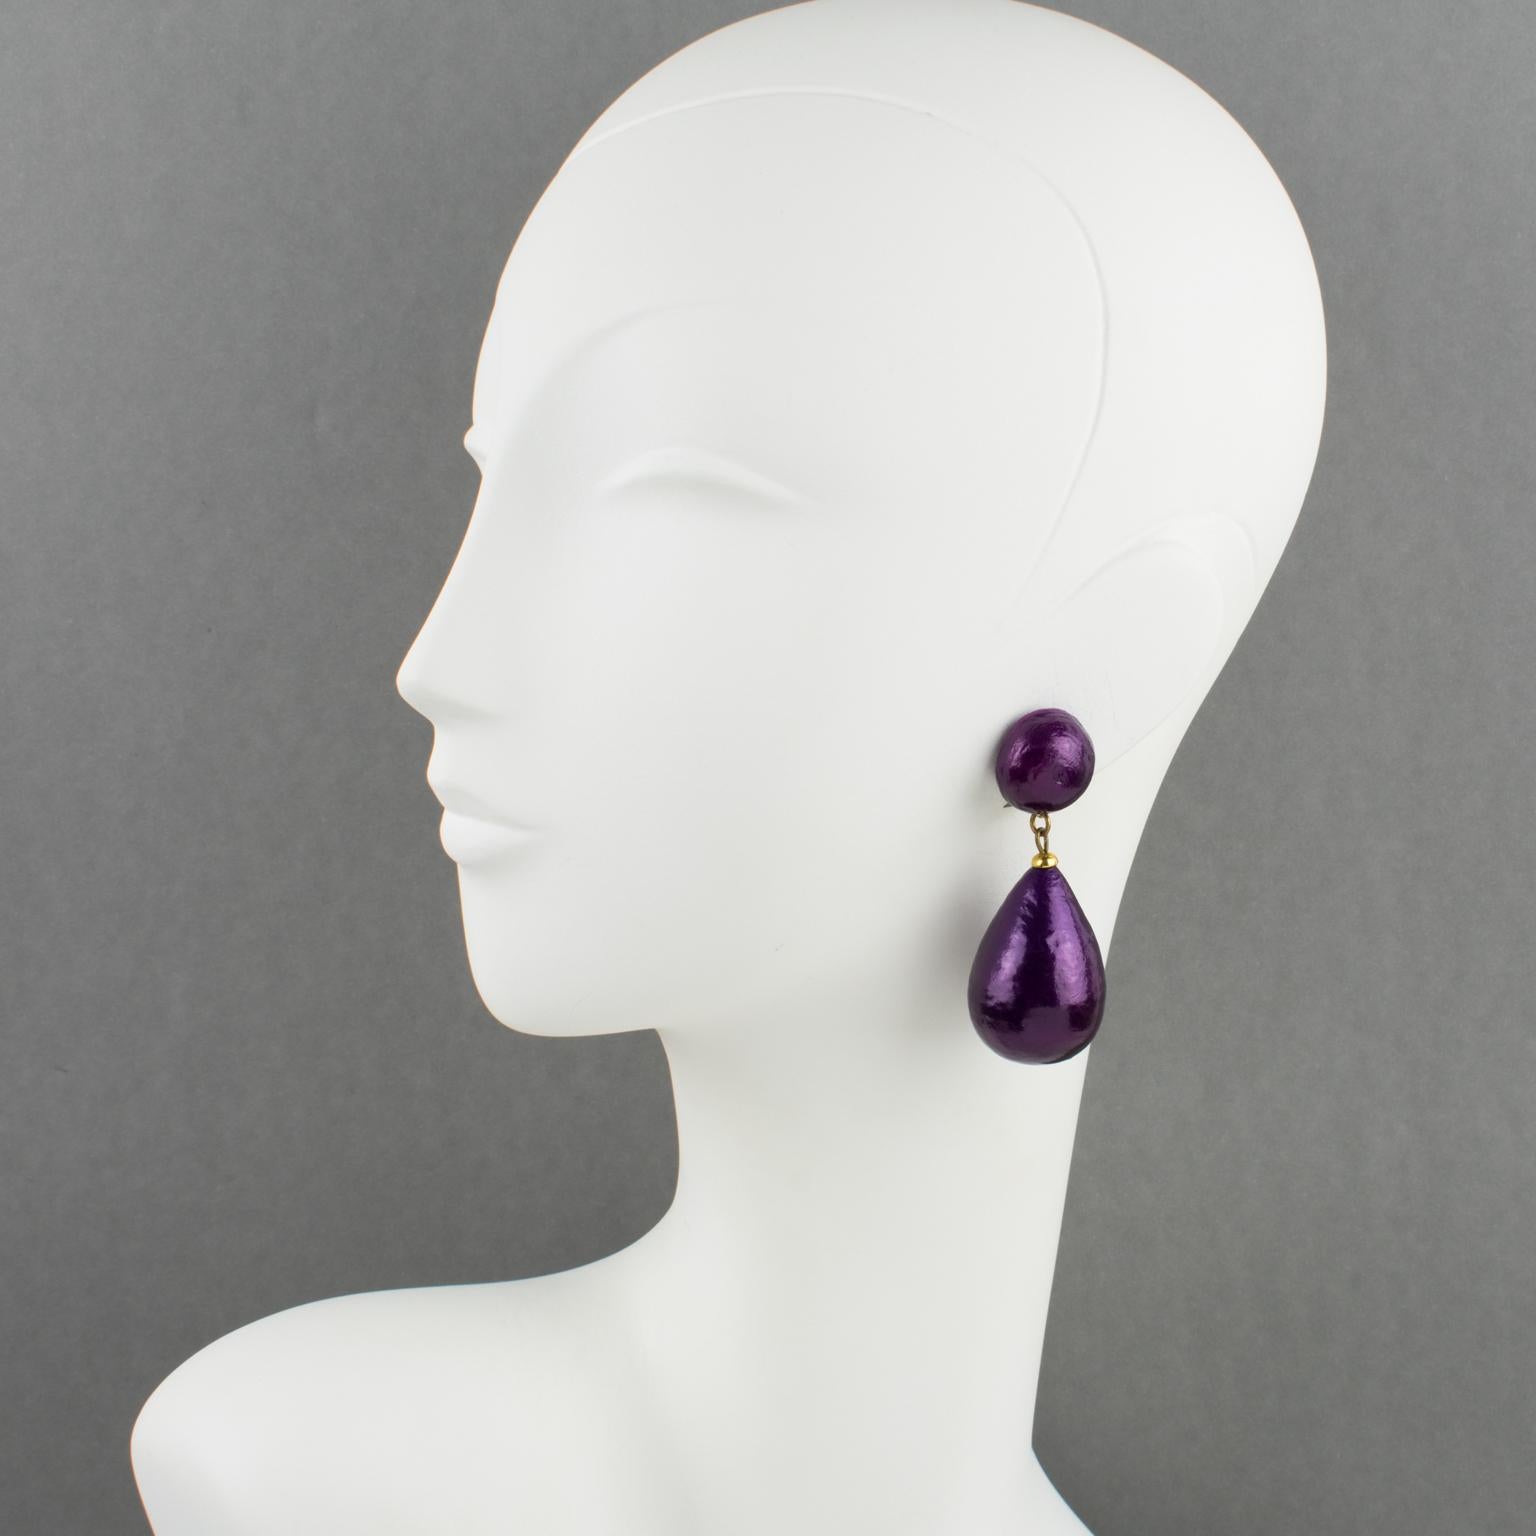 Elegant Francoise Montague Paris resin clip-on earrings. The dangle shape features a resin teardrop bead with a papier-mache-textured pattern in intense pearlized purple color. There is no visible signature like all the vintage Francoise Montague